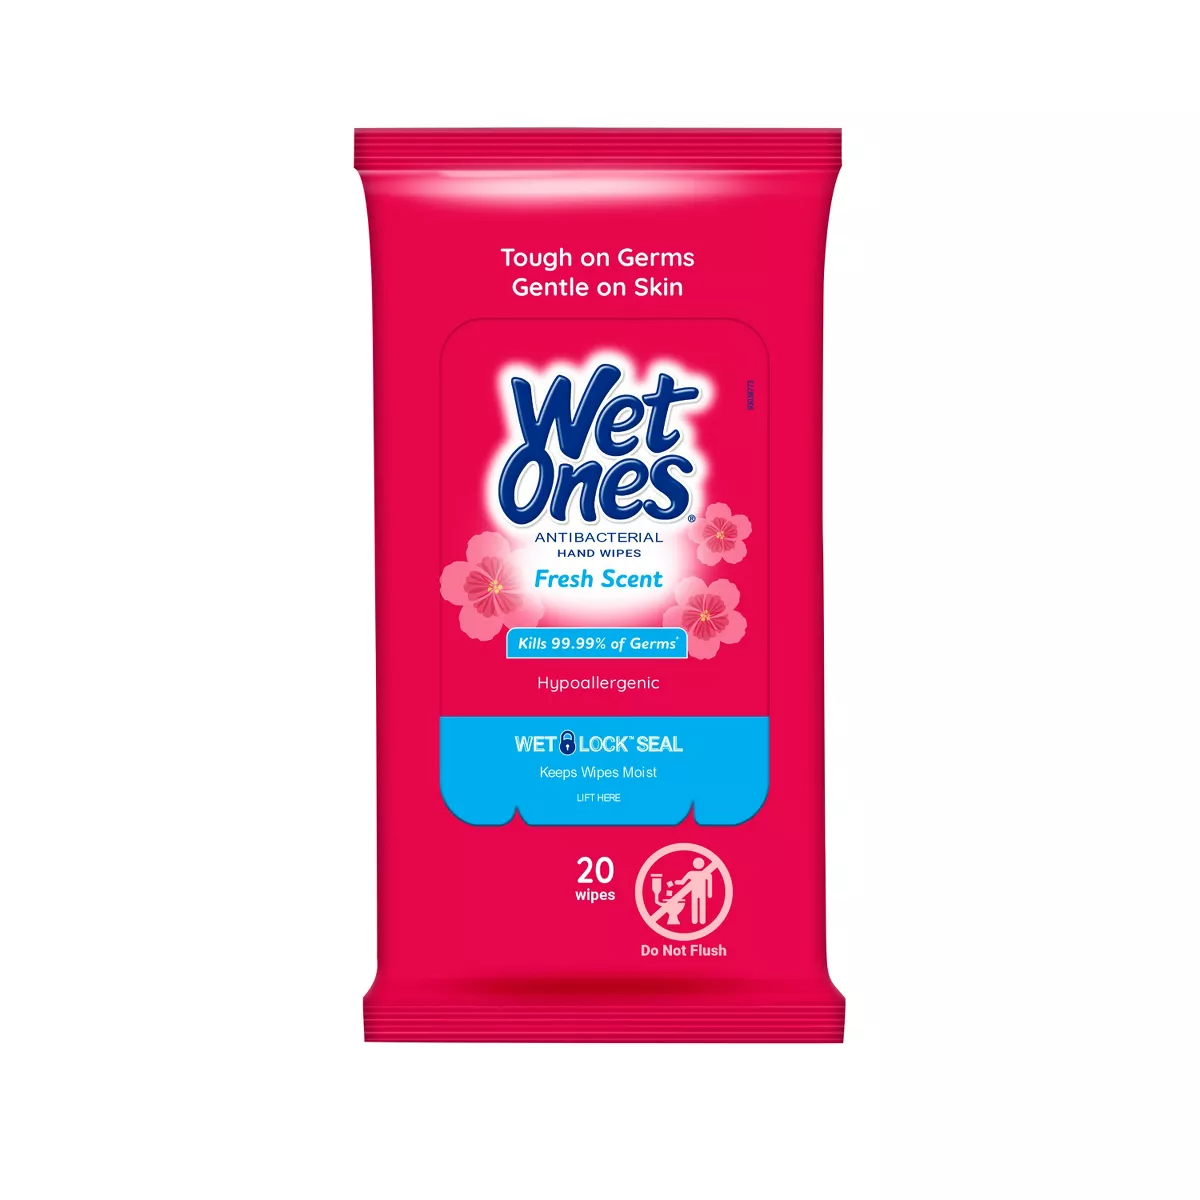 the packet of wipes